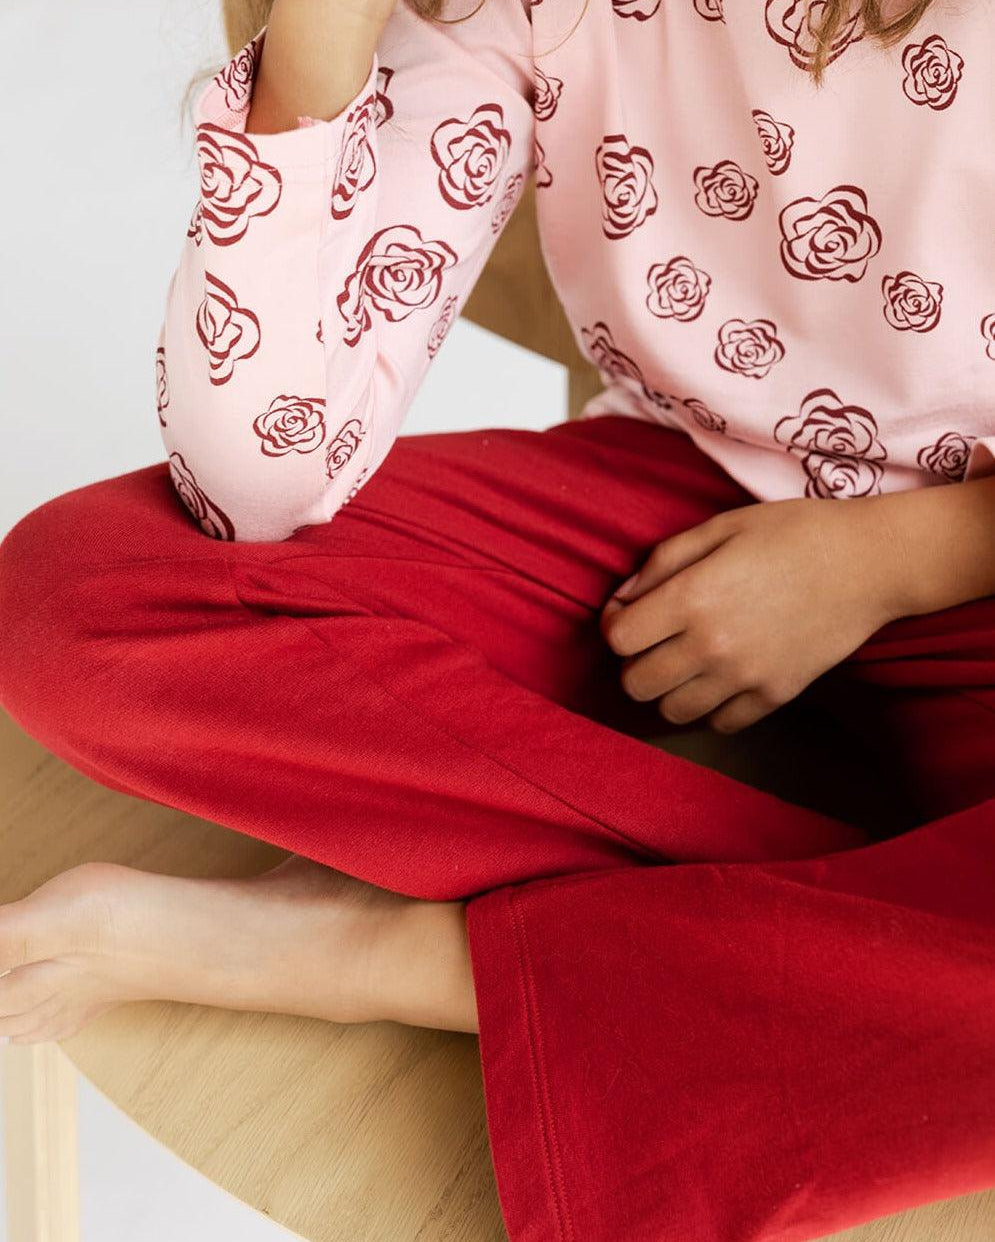 Red Sweatpants and Rose Long Sleeve Shirt